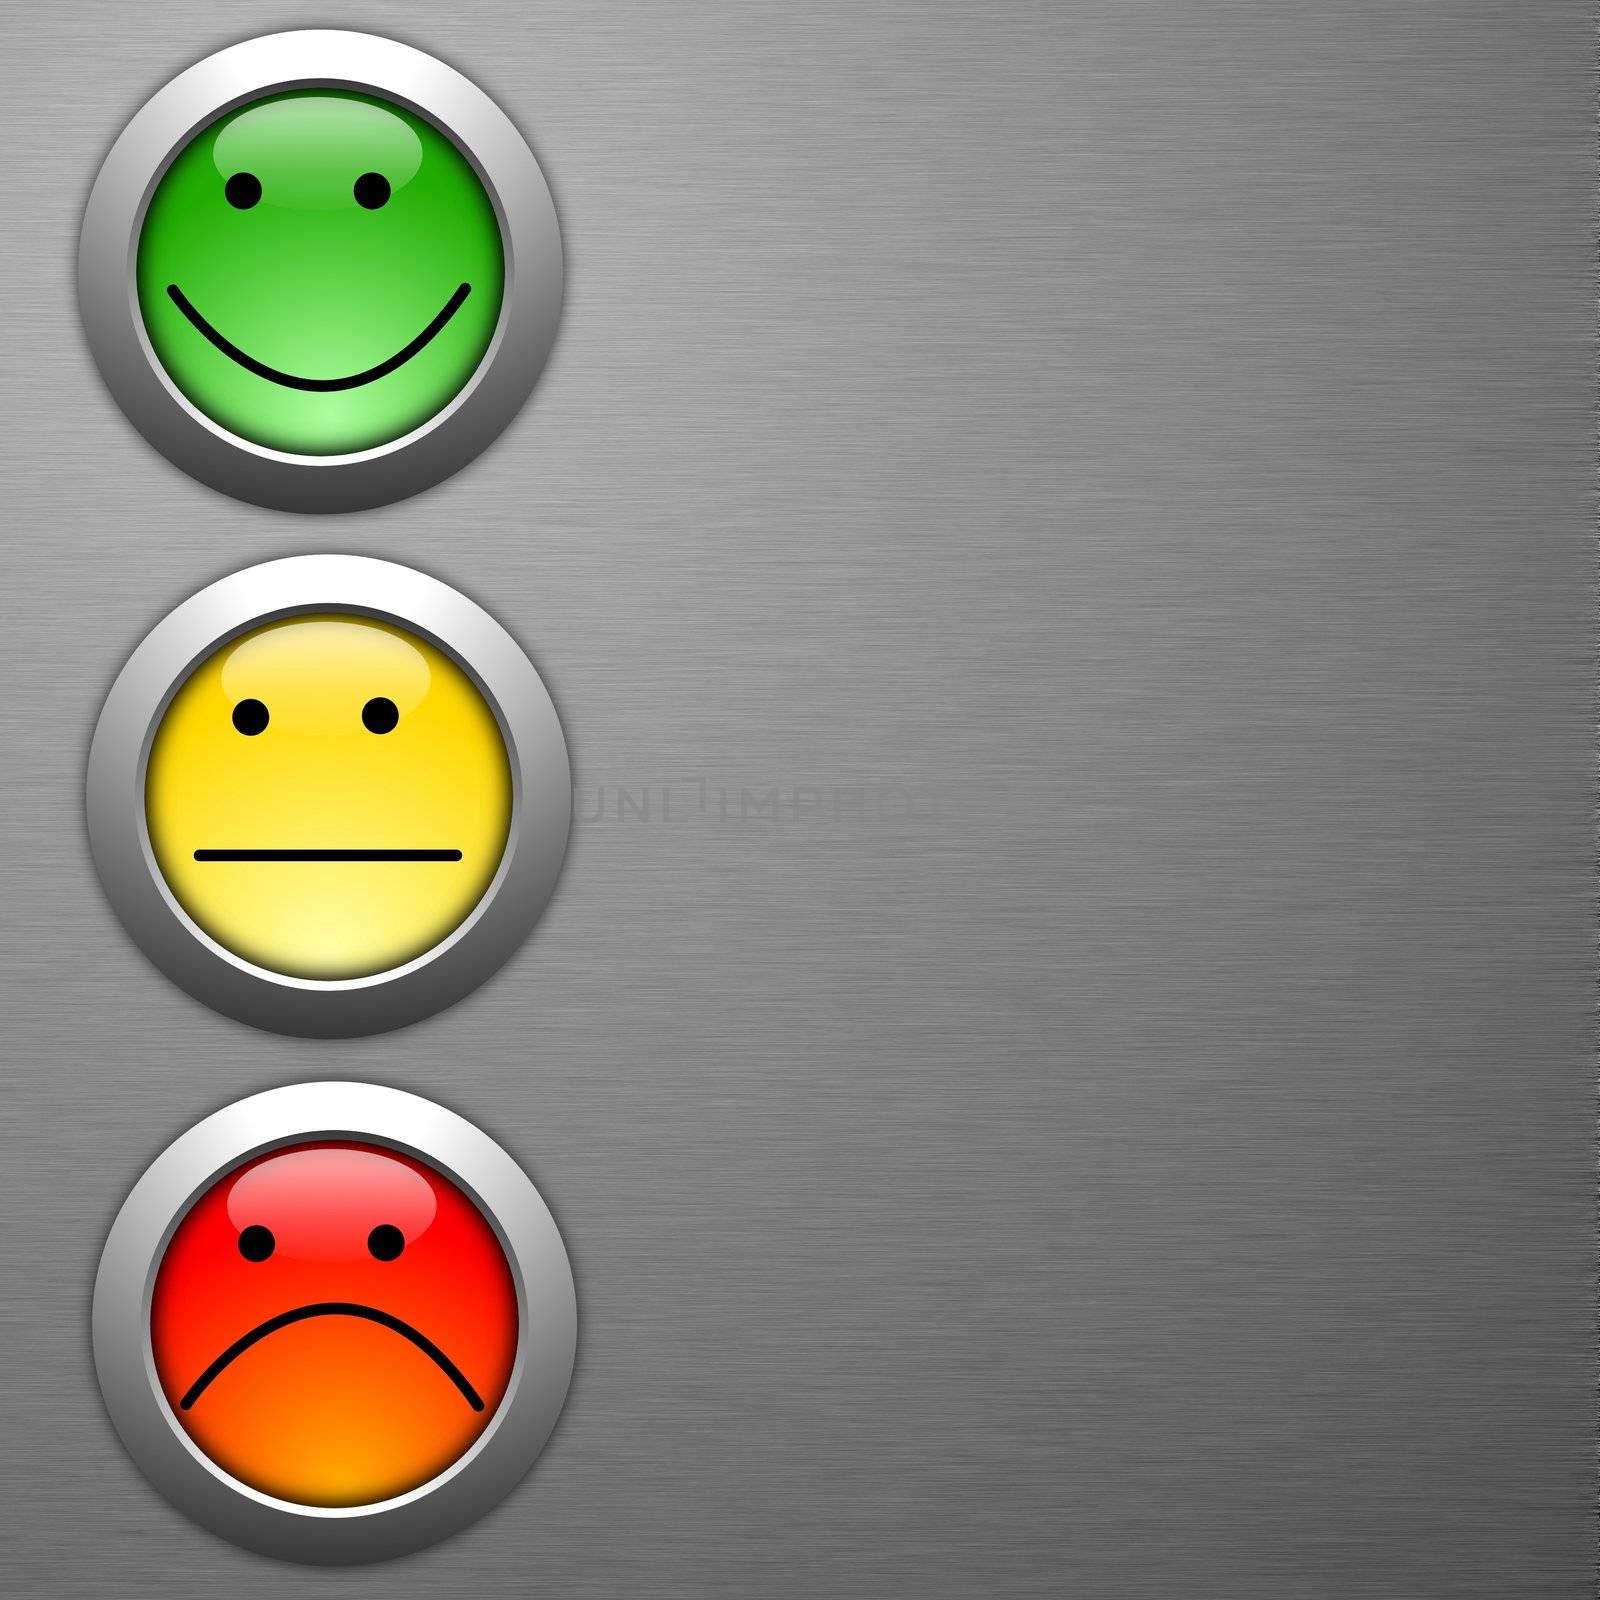 customer satisfaction survey concept with smilie and button